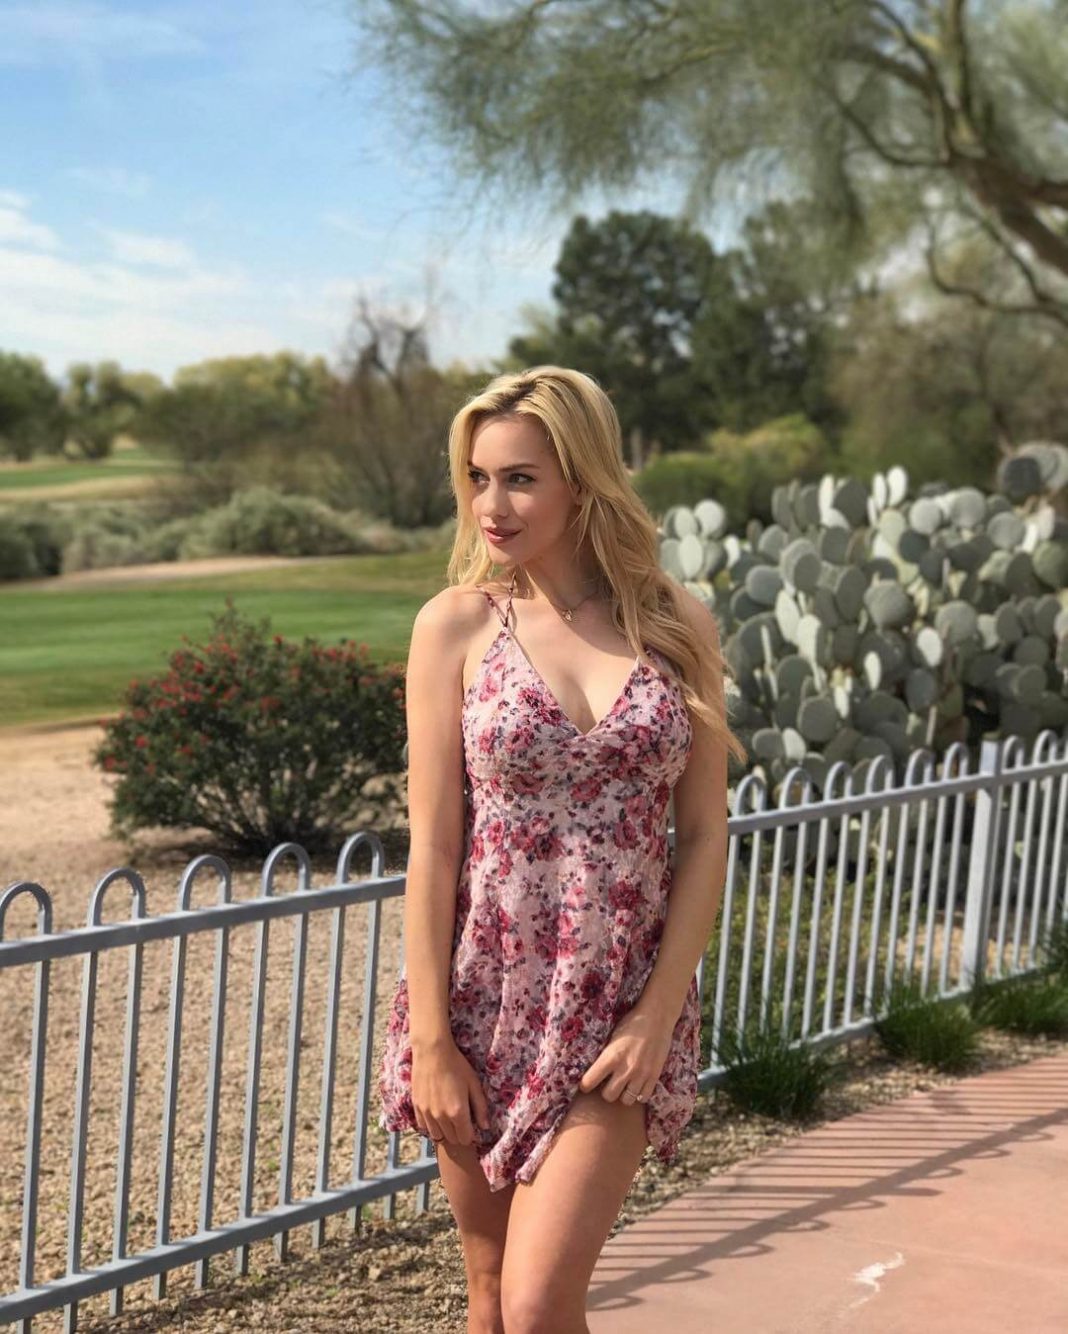 51 Paige Spiranac Nude Pictures Brings Together Style, Sassiness And Sexiness 18